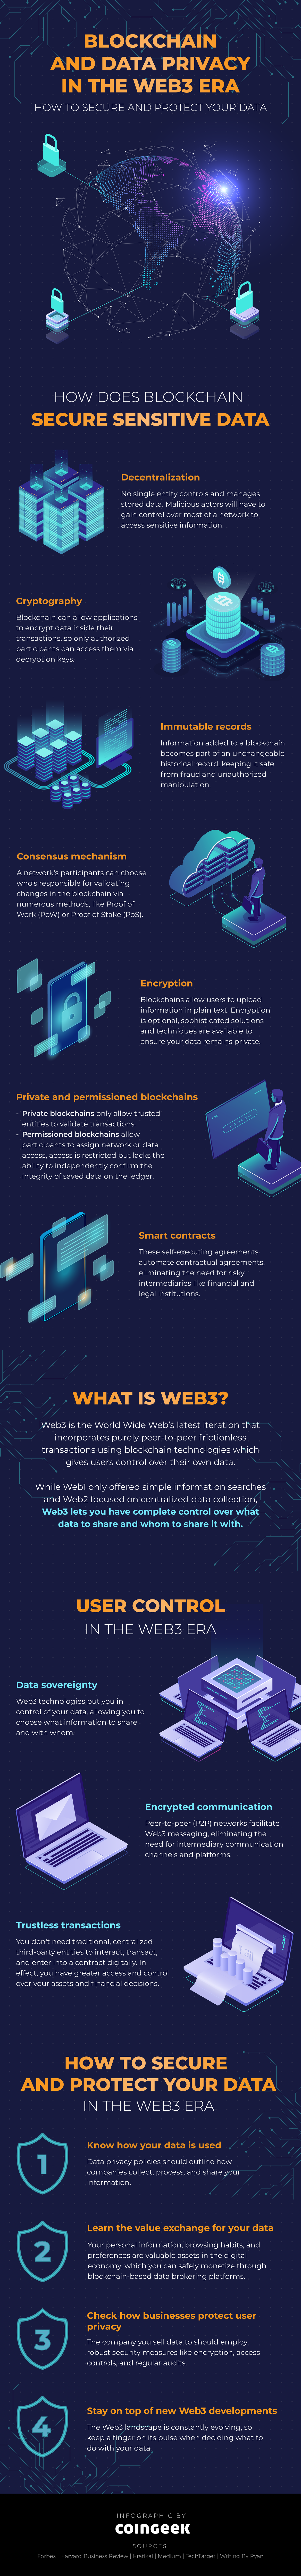 Blockchain and Data Privacy infographic